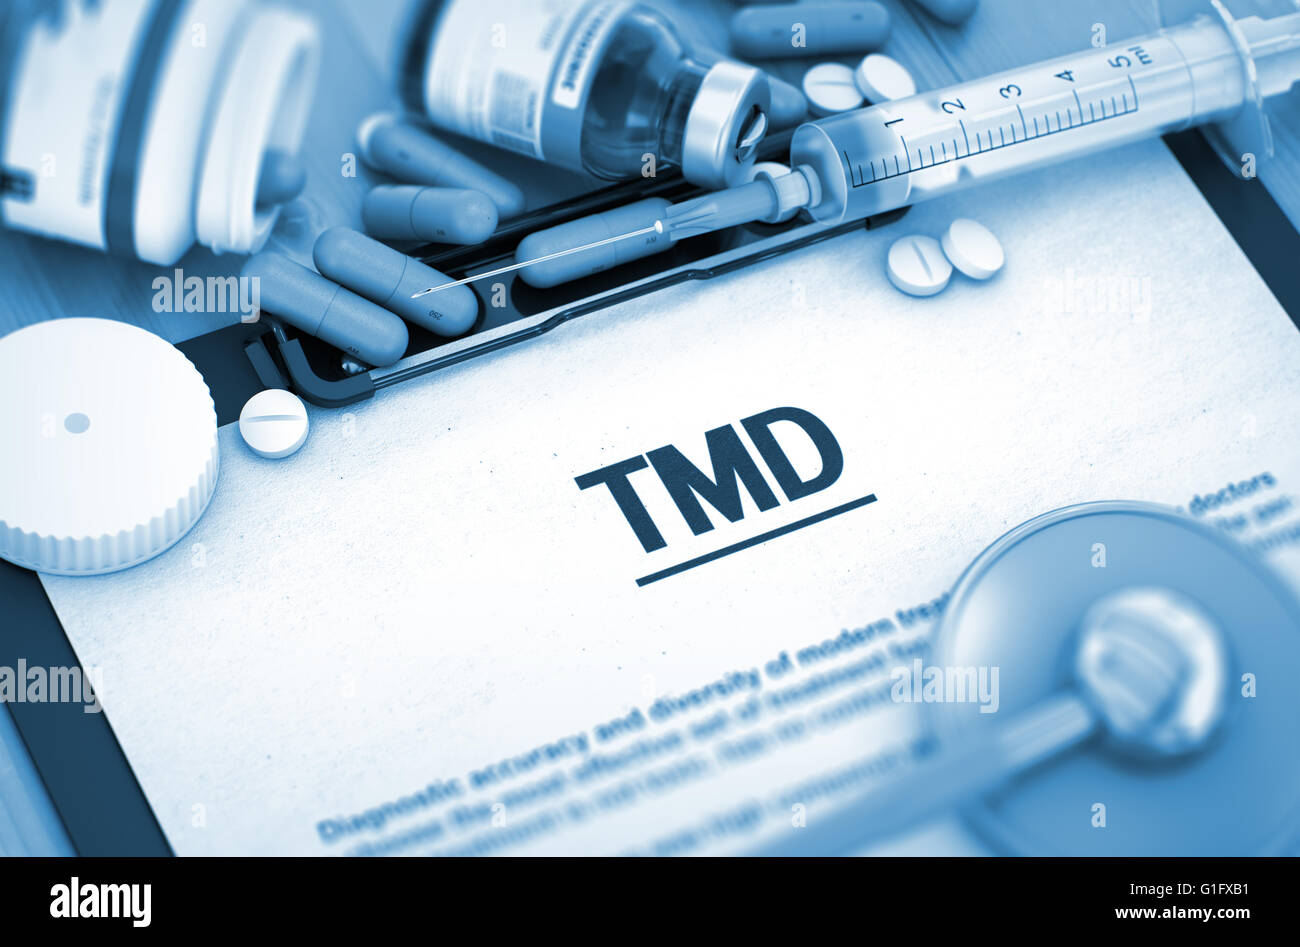 TMD Diagnosis. Medical Concept. Composition of Medicaments. Stock Photo